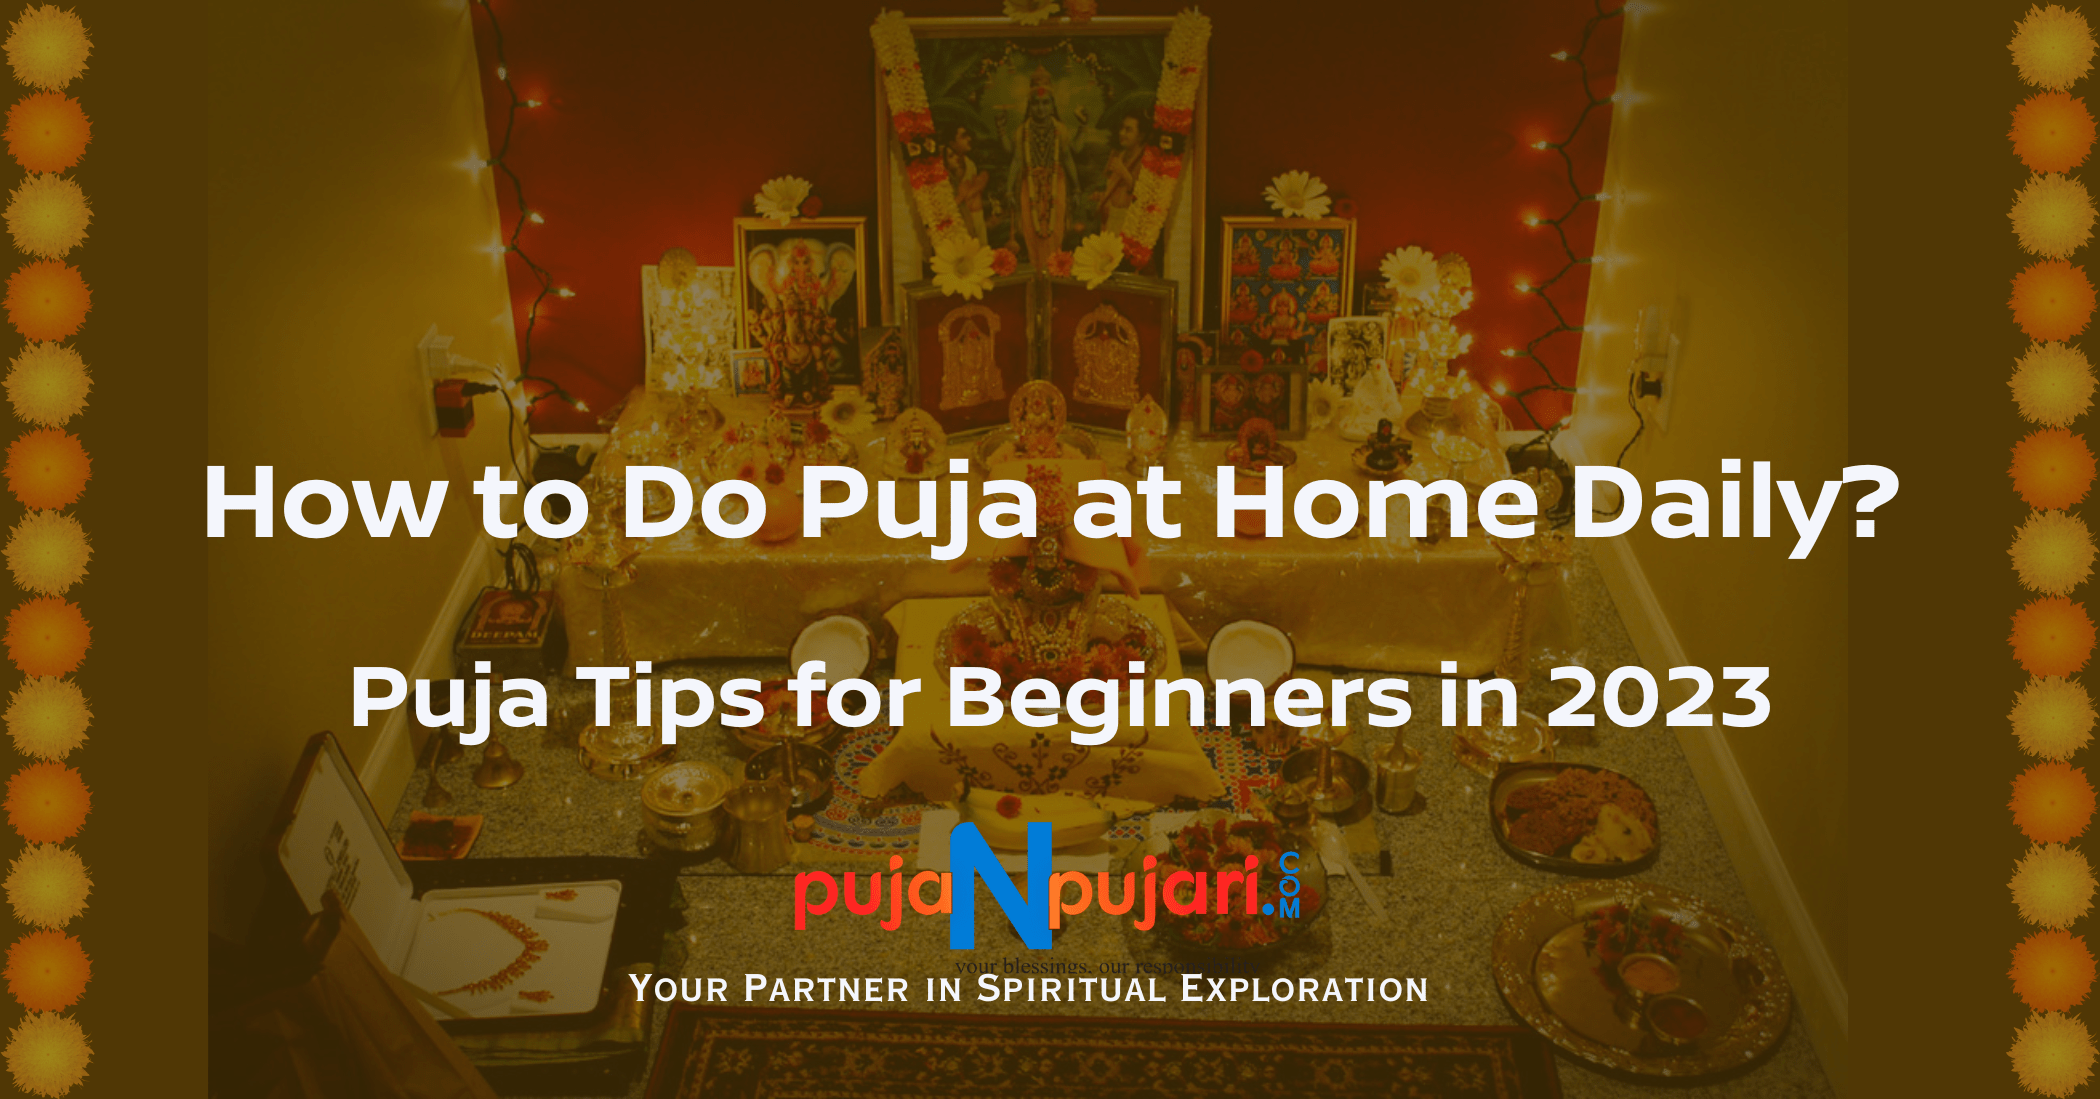 How to Do Puja at Home Daily? Puja Tips for Beginners